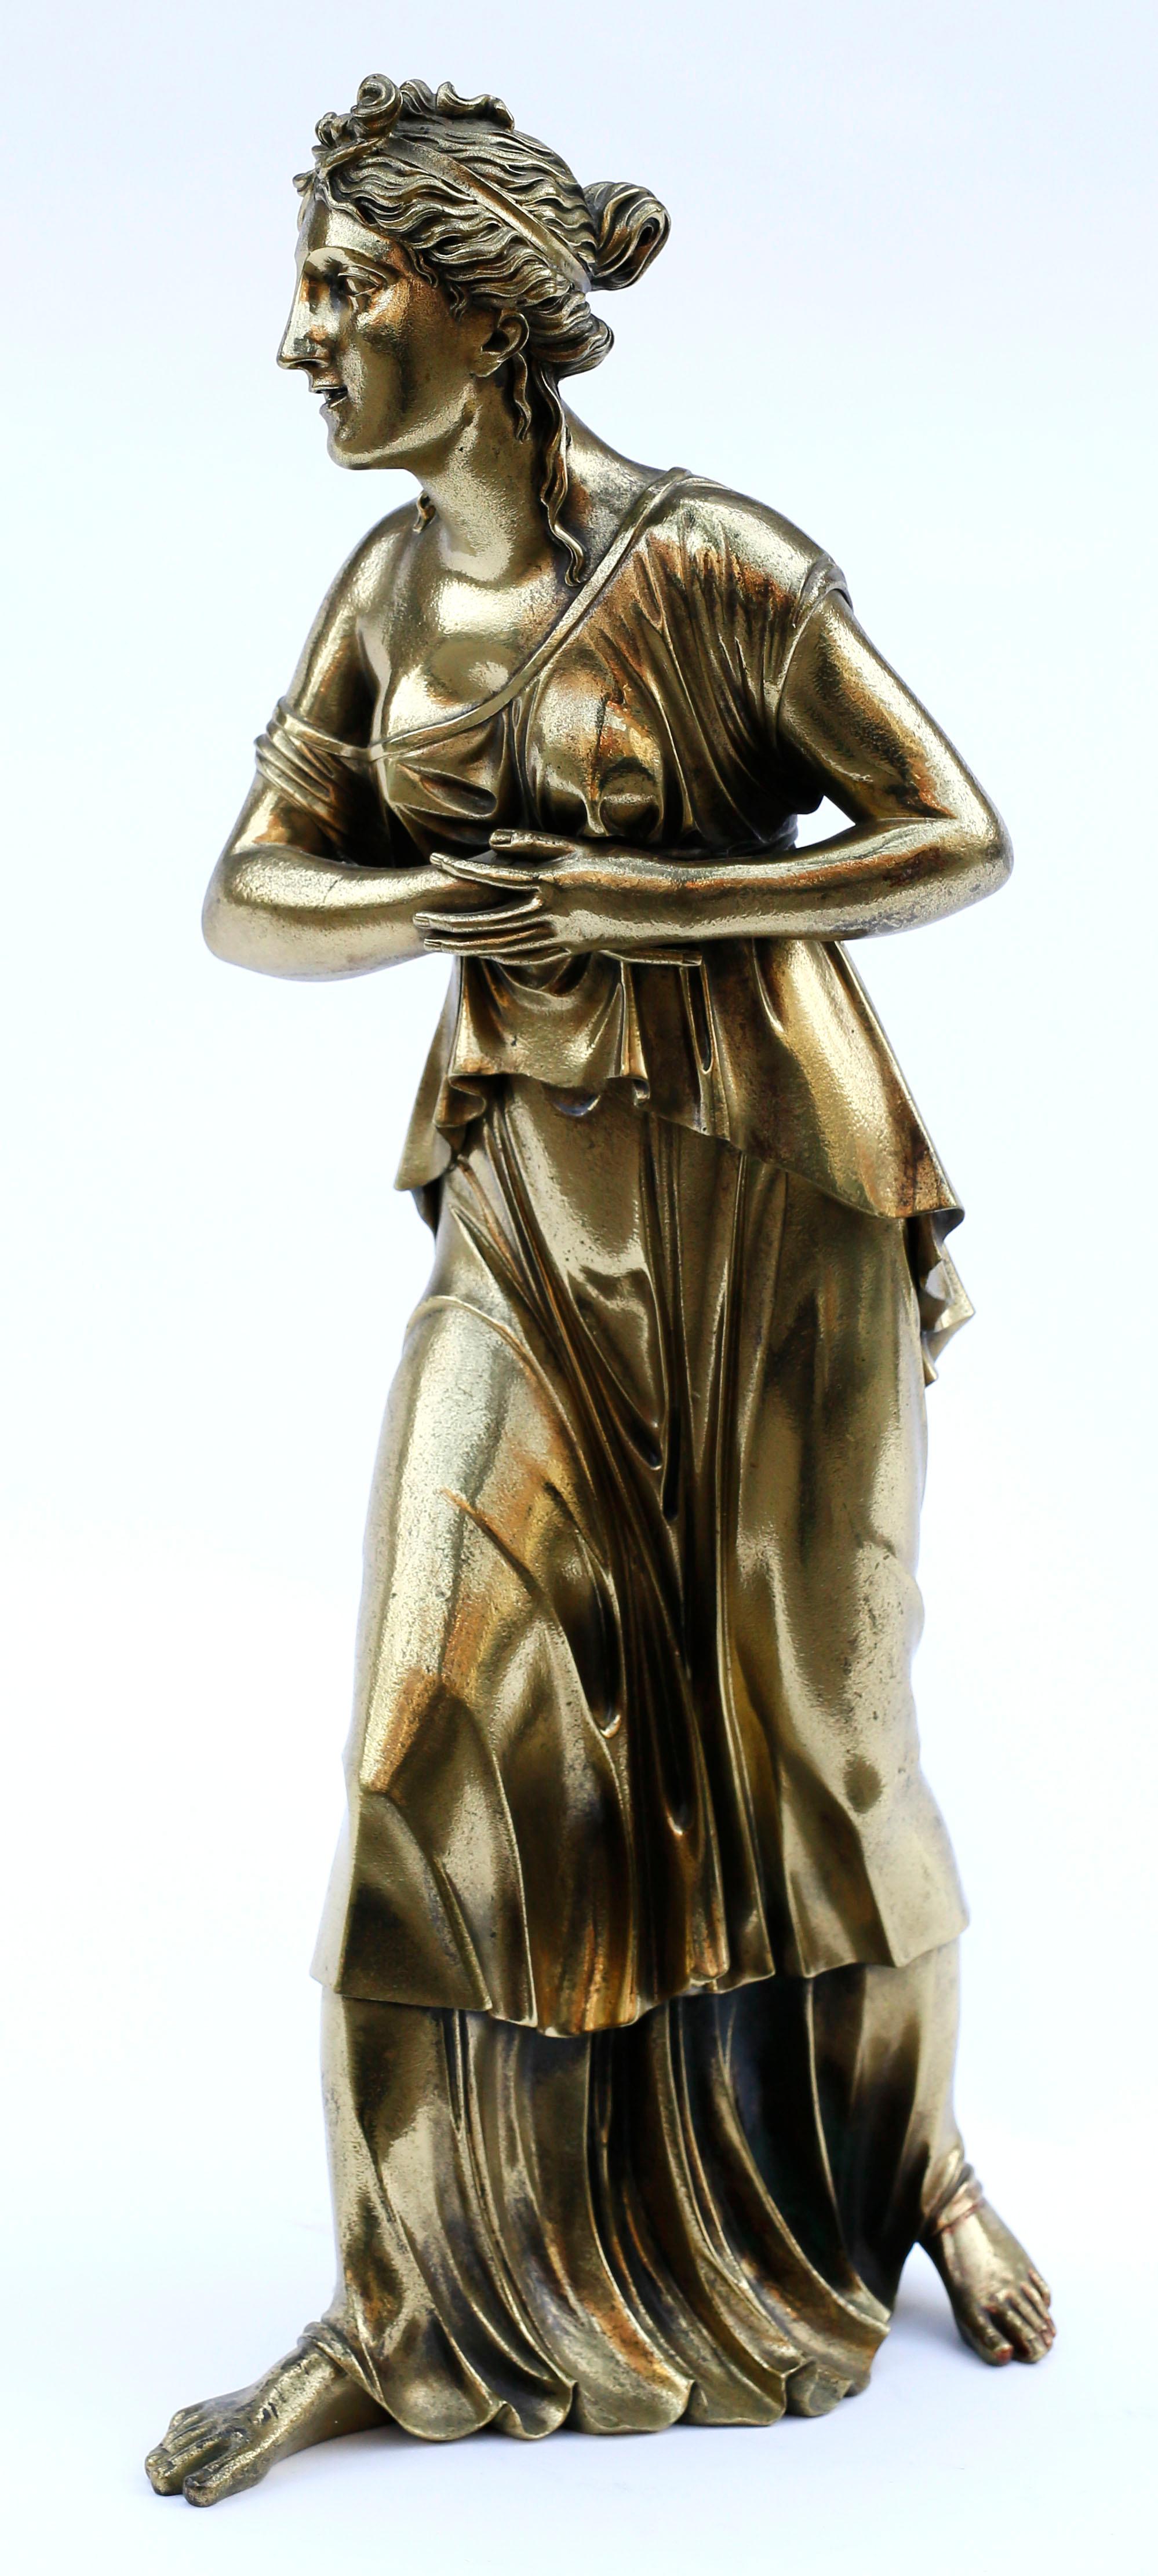 A masterful large classical statue in cast bronze of a beautiful young woman in stride wearing a flowing ionic chiton. The exquisite casting of the details of the woman's hair and deeply folded robes mark the piece as extraordinary from both a